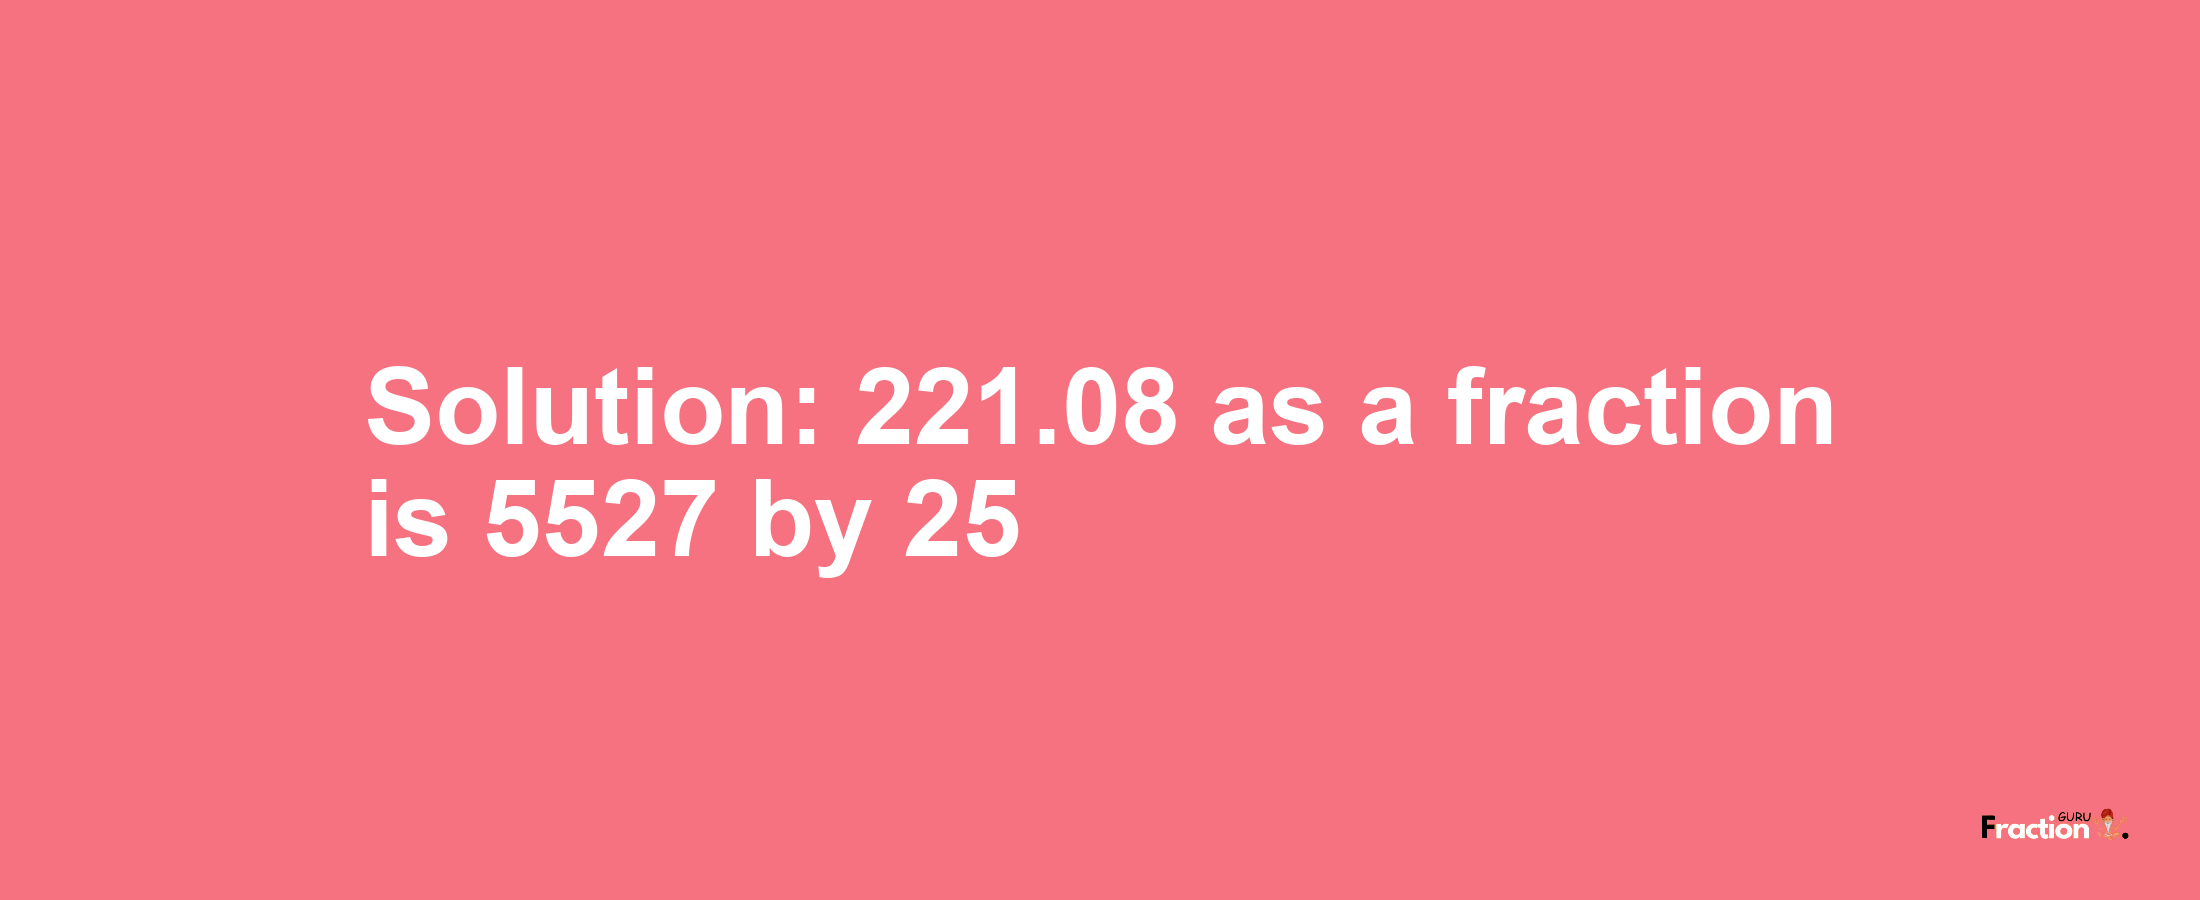 Solution:221.08 as a fraction is 5527/25